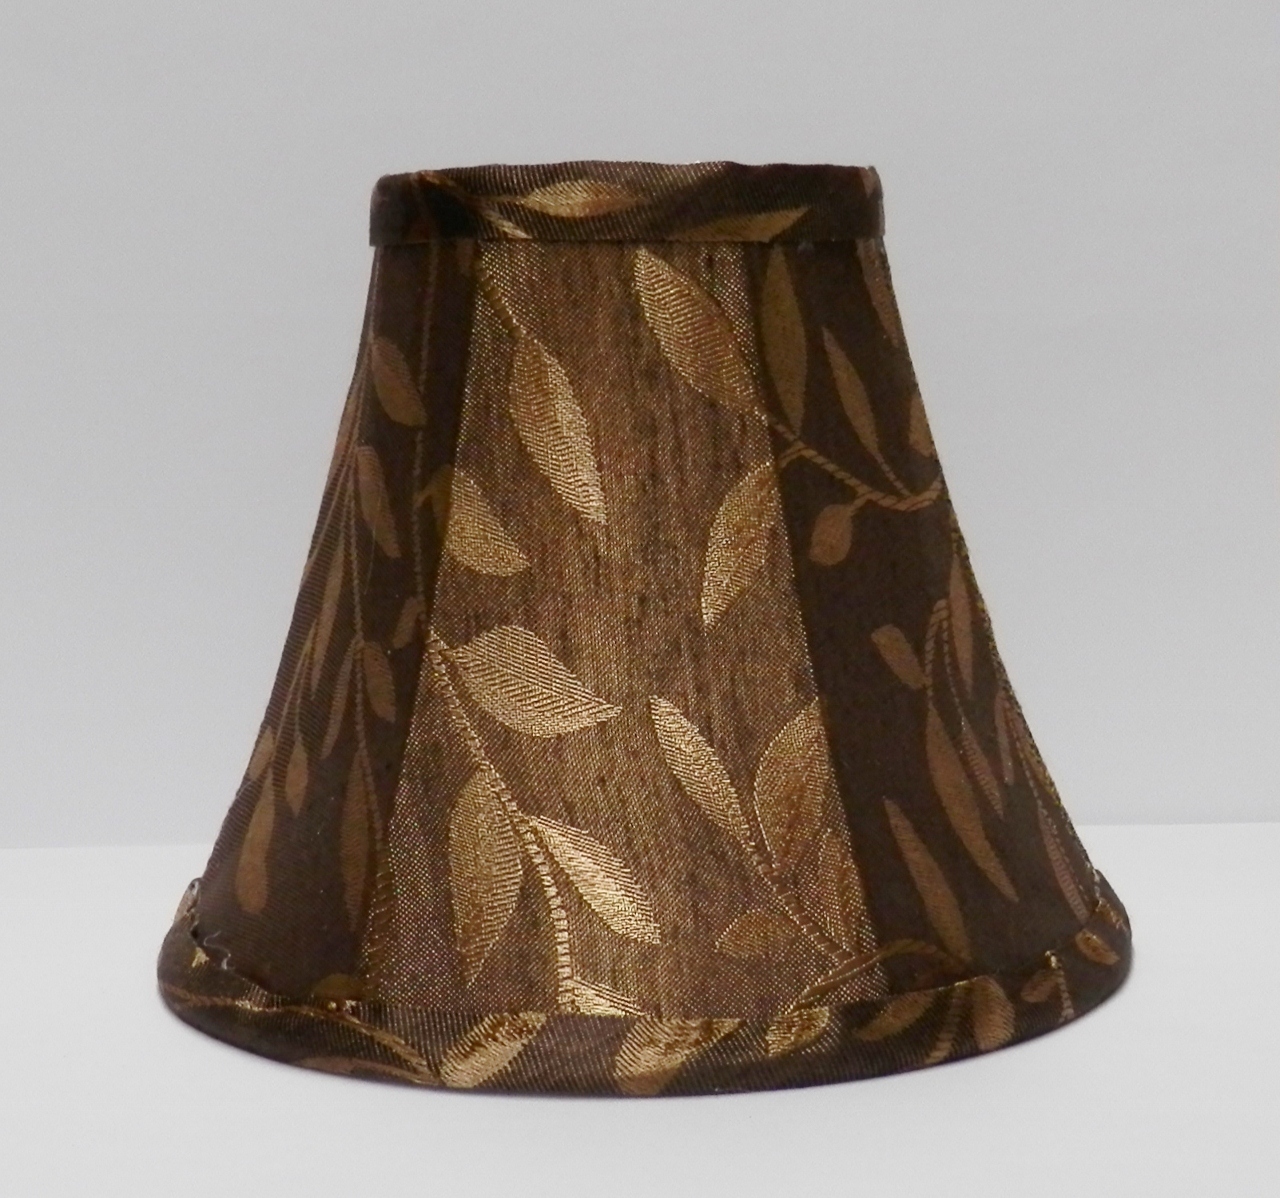 Bronze - Brown w/Gold Leaves All Fabric Chandelier Lamp Shade - $13.00